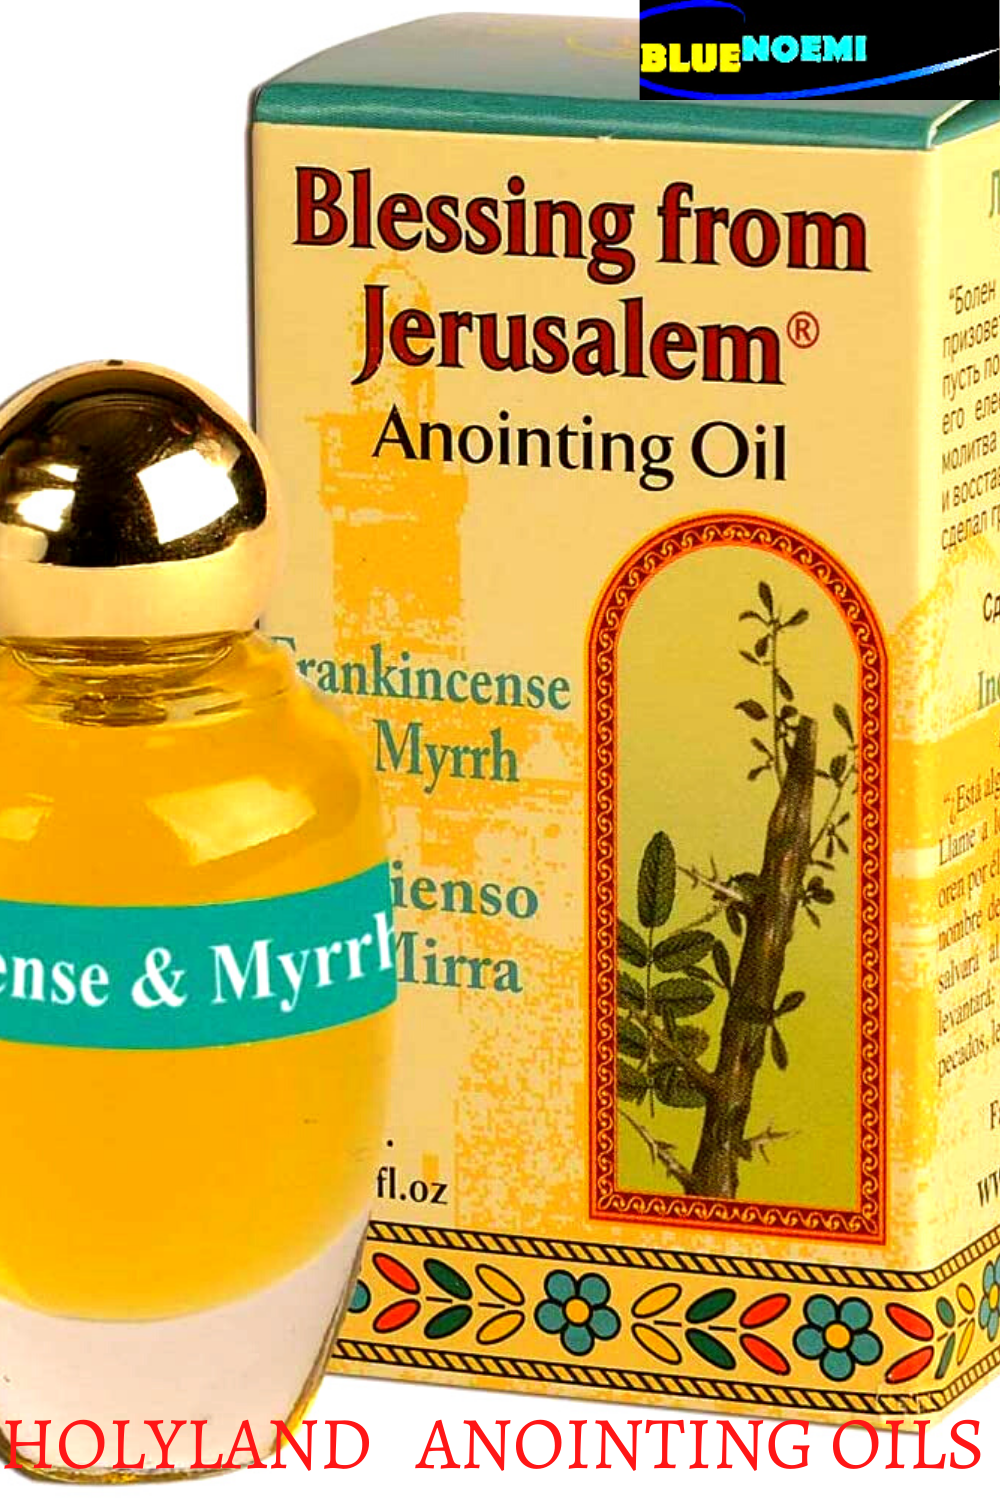 anointing oils from the Holy Land